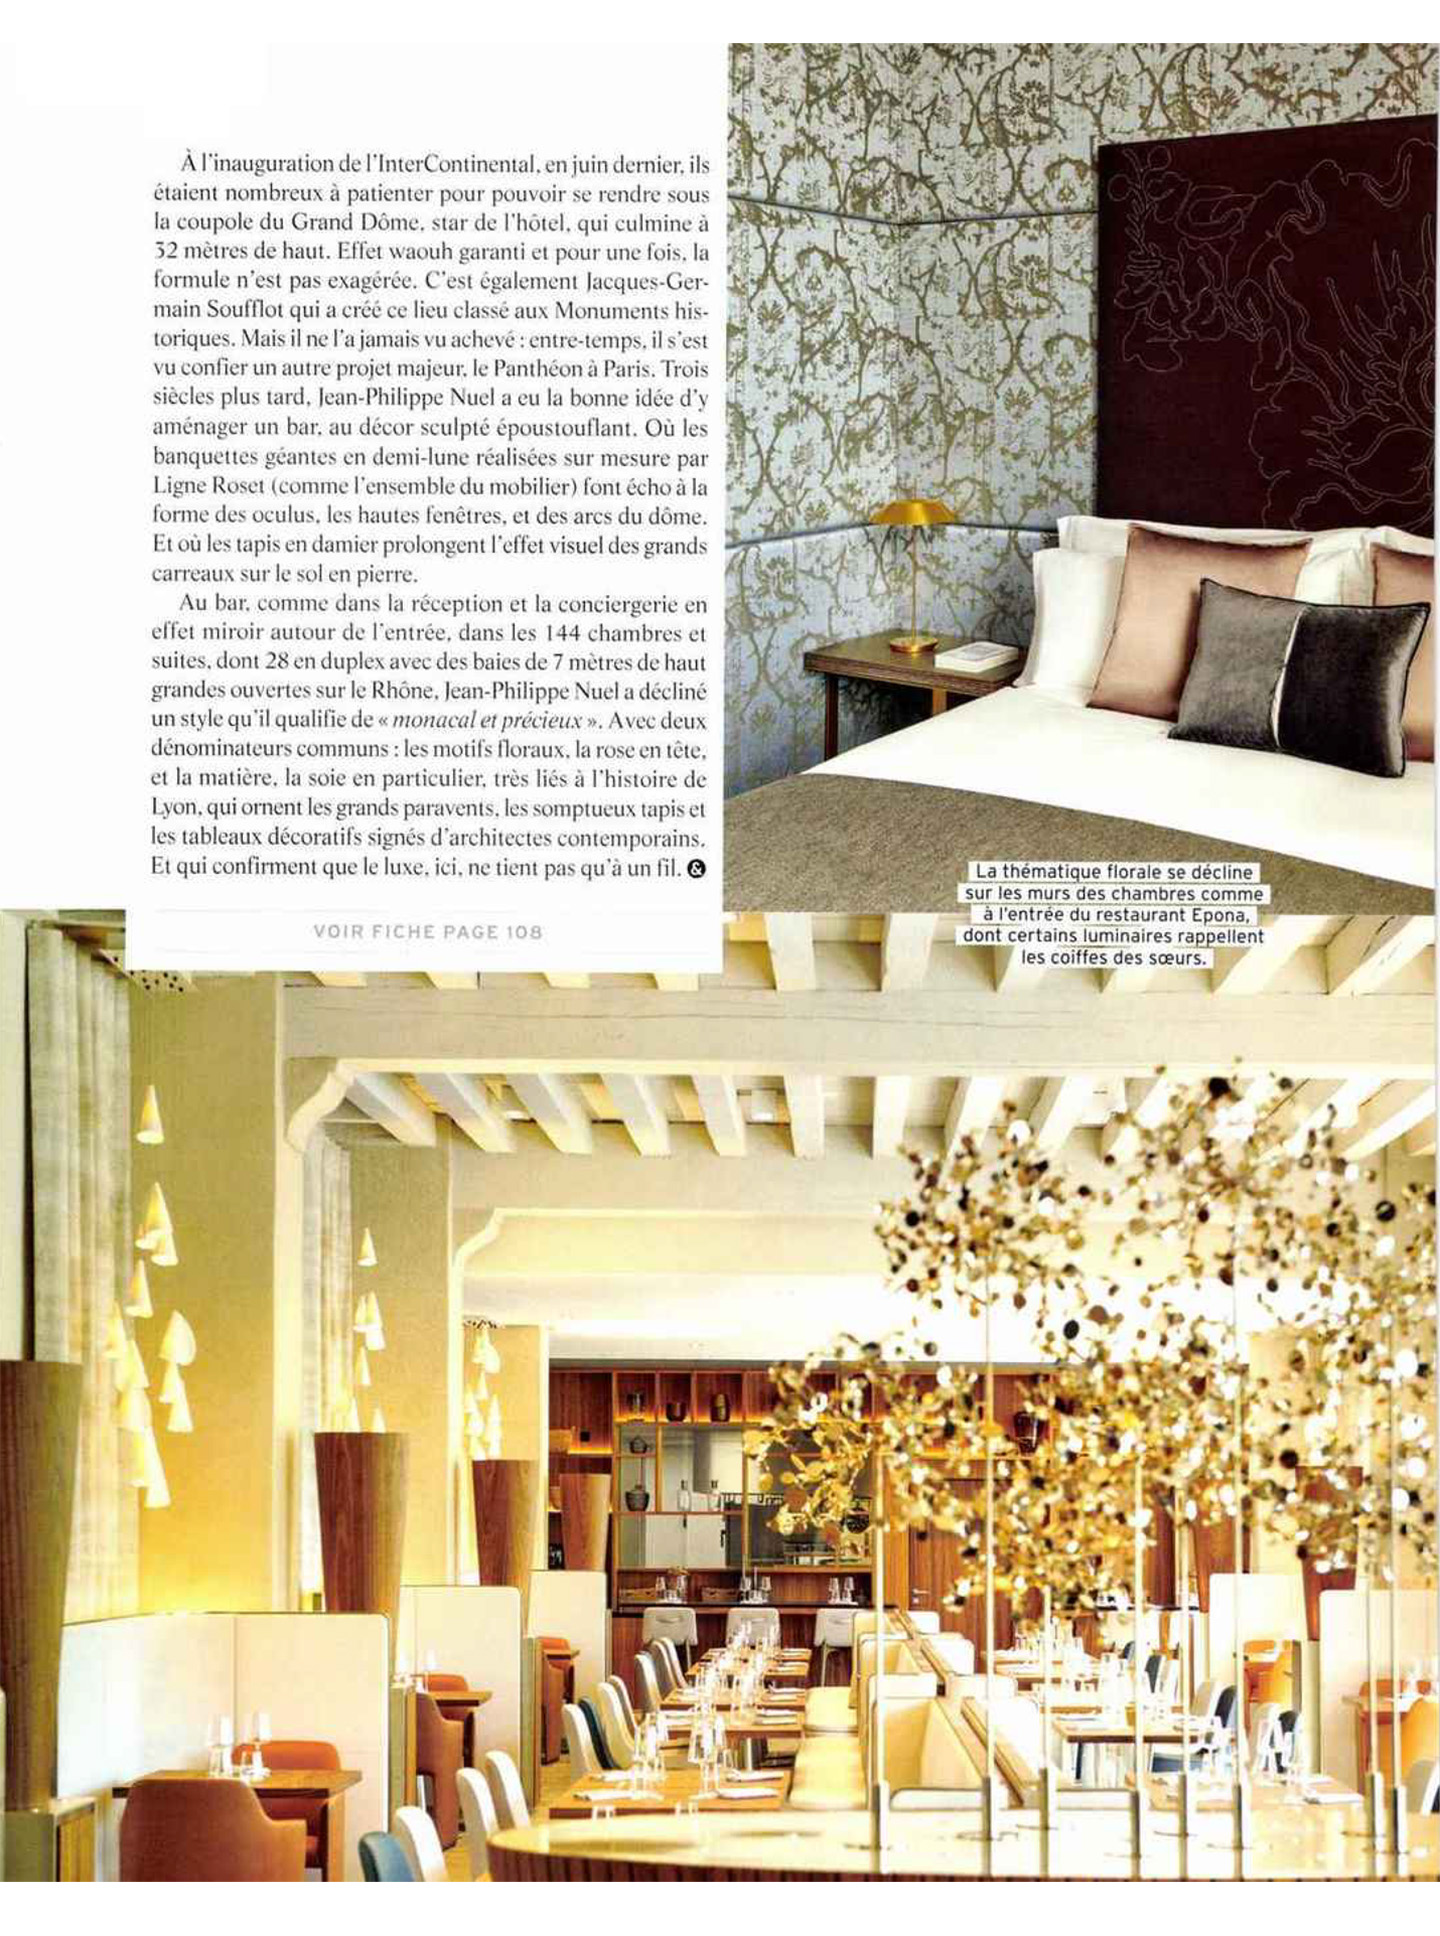 article on the InterContinental Lyon Hotel dieu, 5 star luxury hotel designed by architect jean-philippe nuel